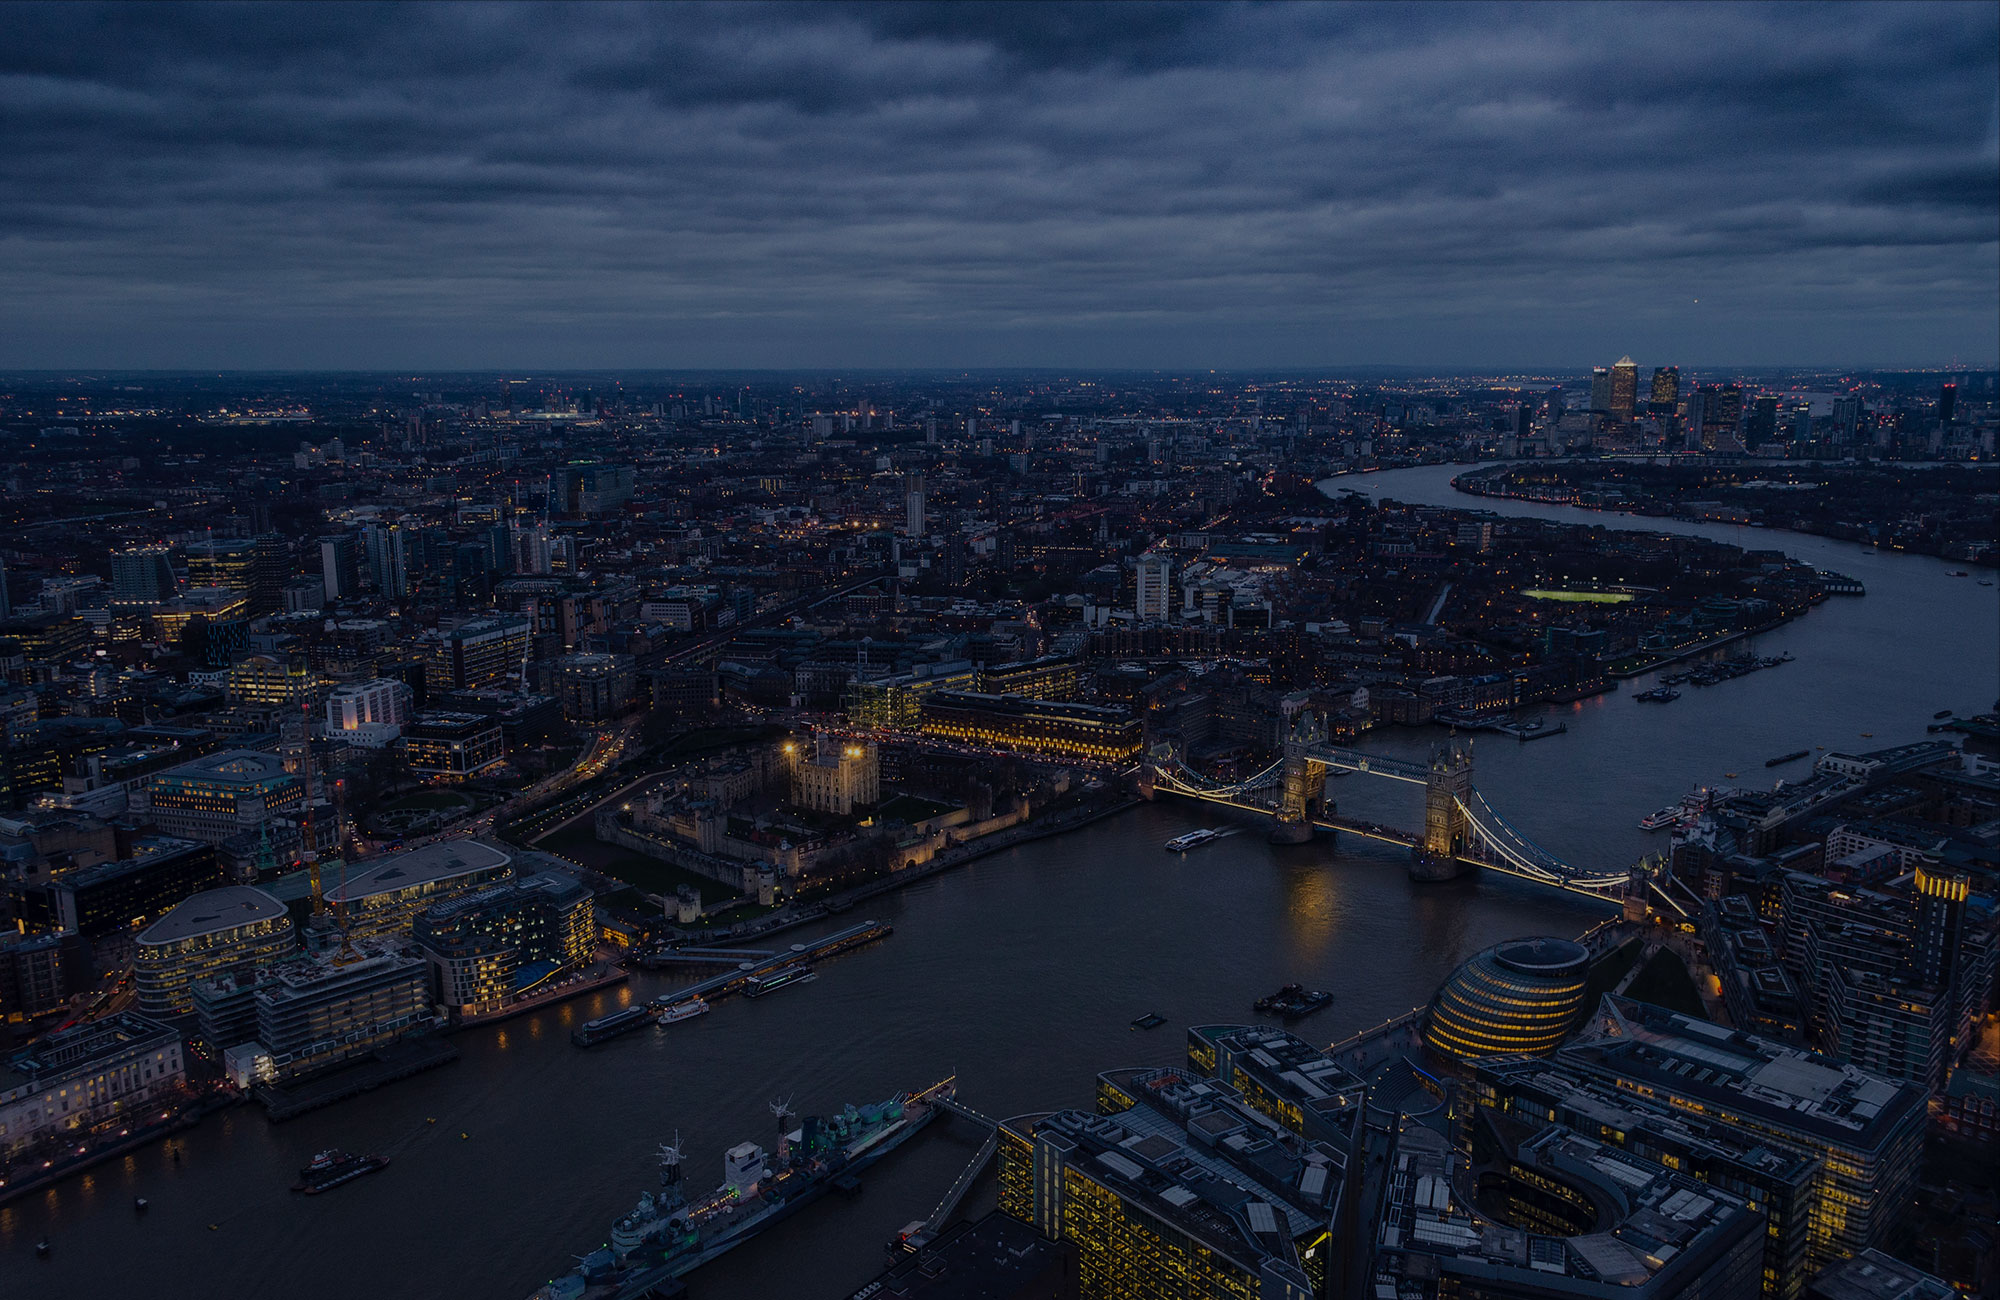 Sky View of Central London including Tower Bridge